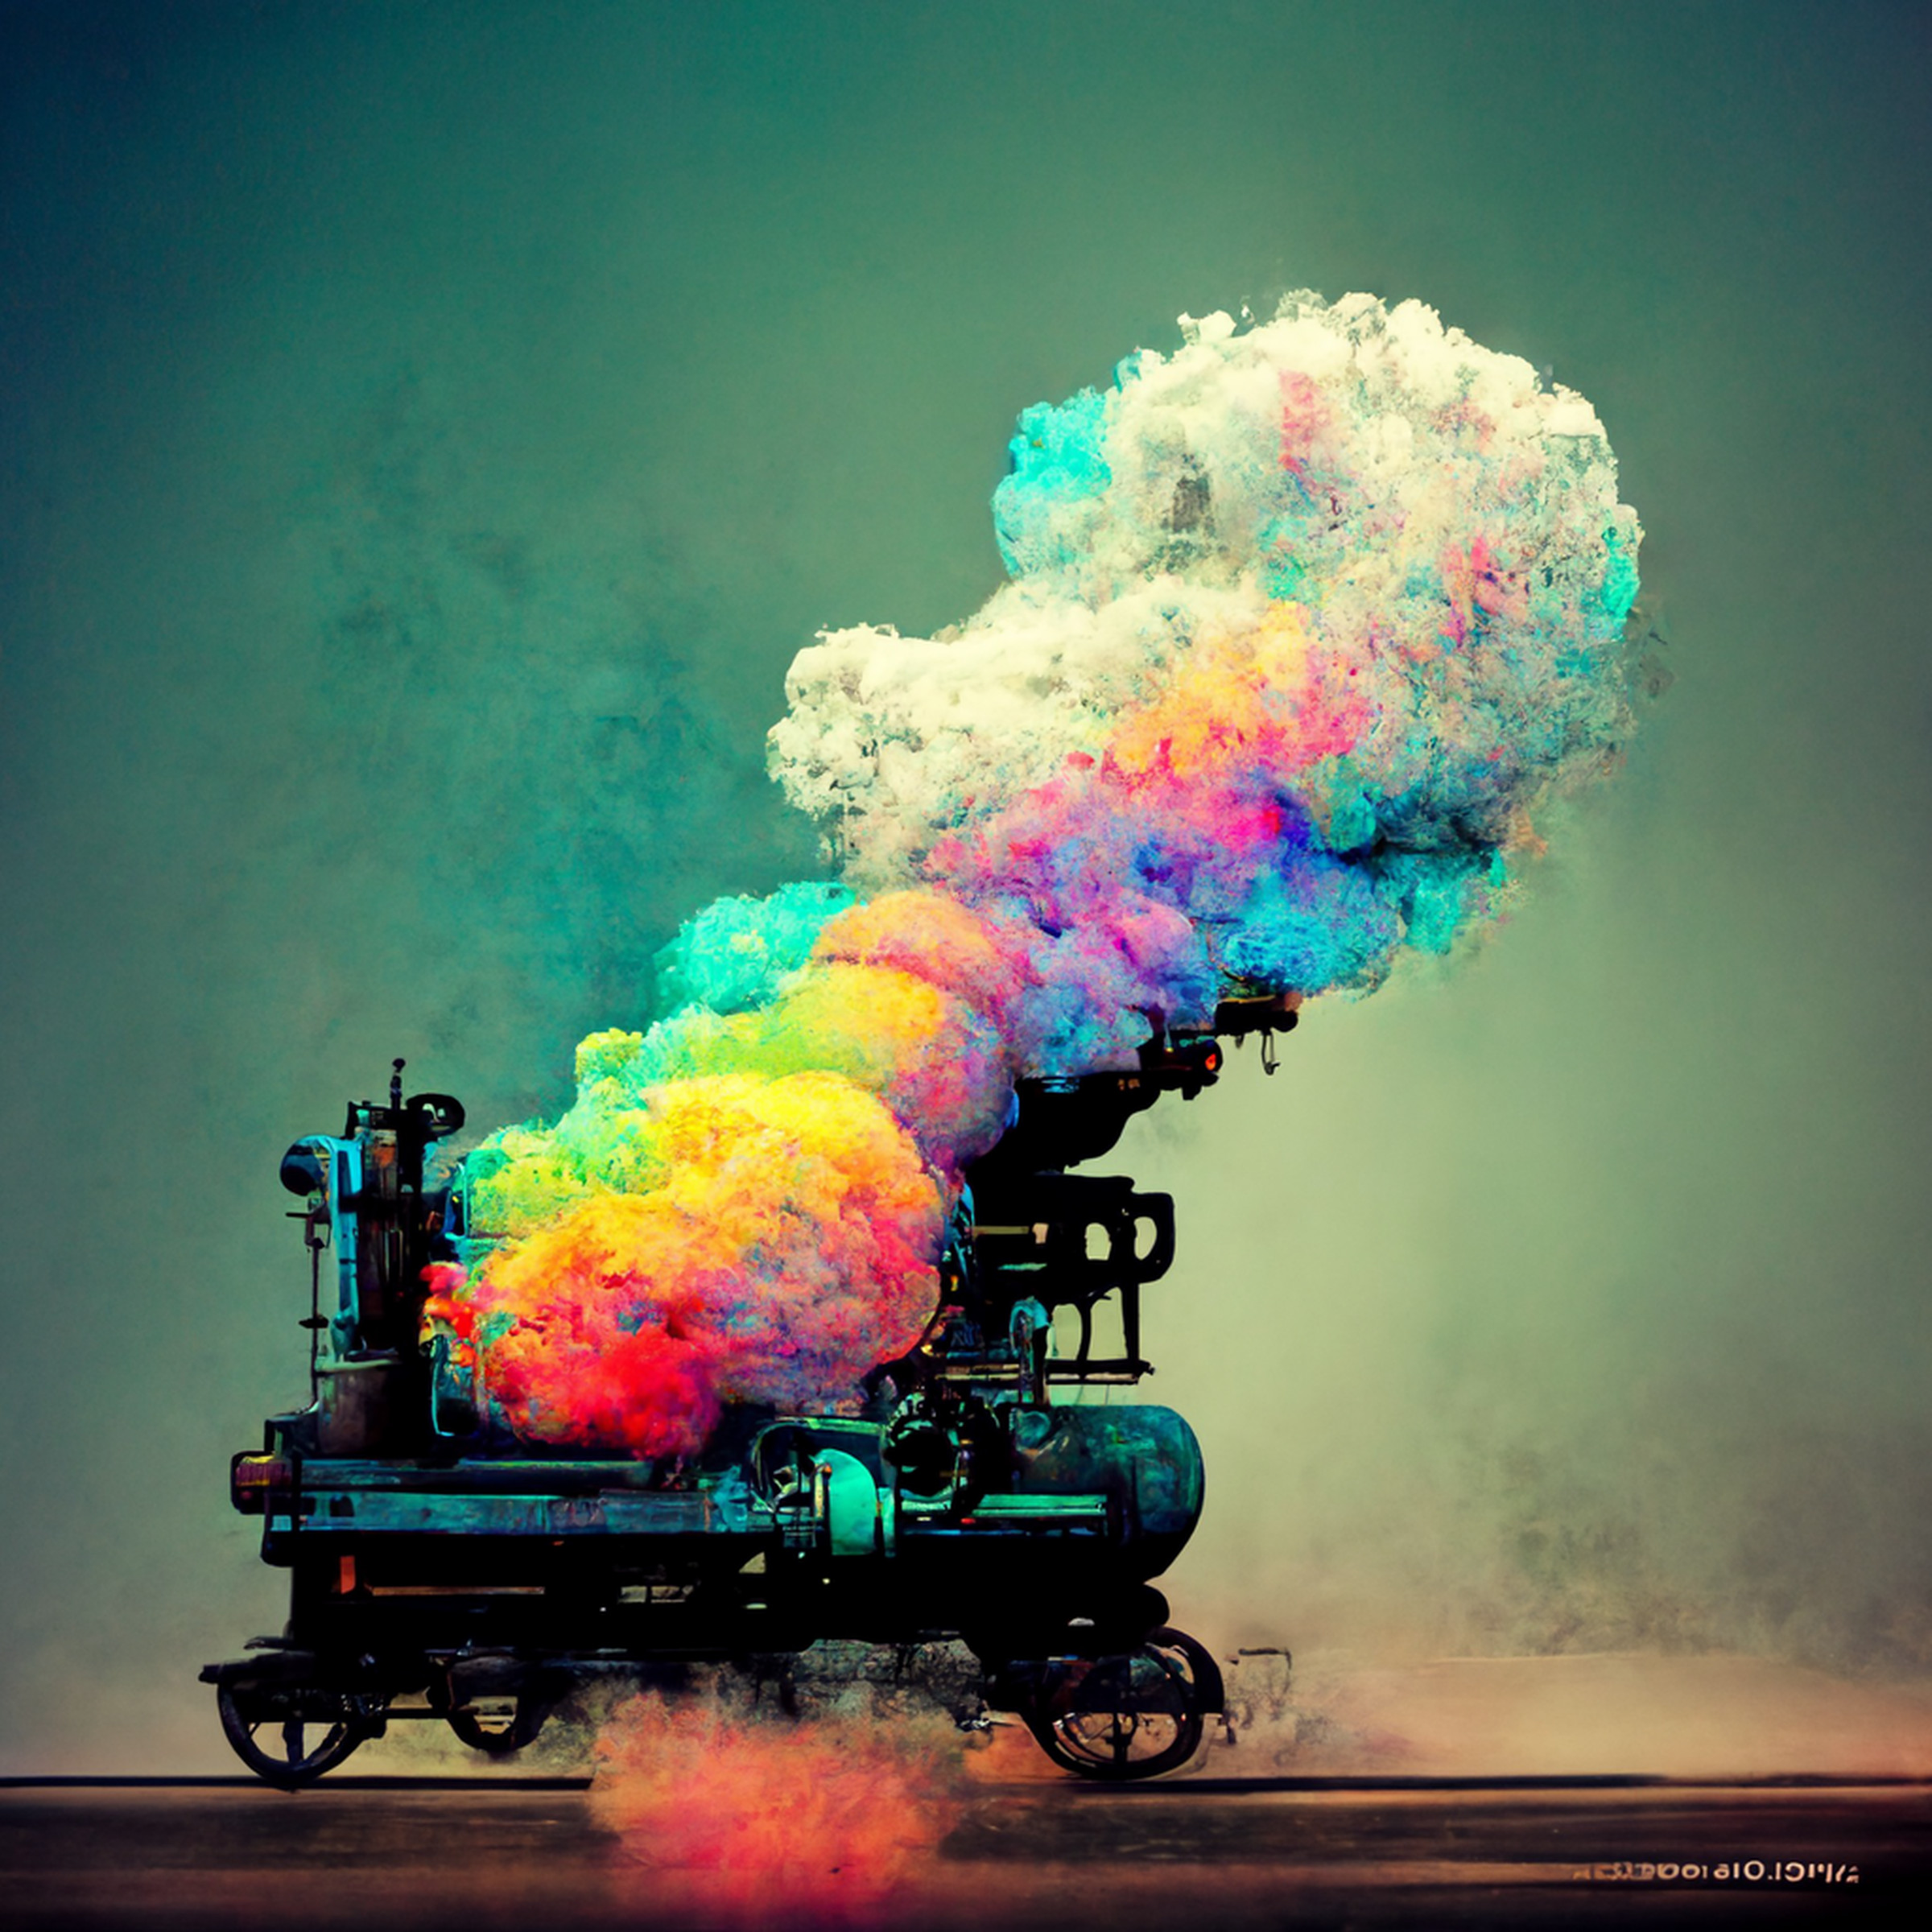 An AI-generated image was made with the following prompt: “A robot steam engine, barreling down the tracks at terrific speed, emitting clouds of colorful smoke.”